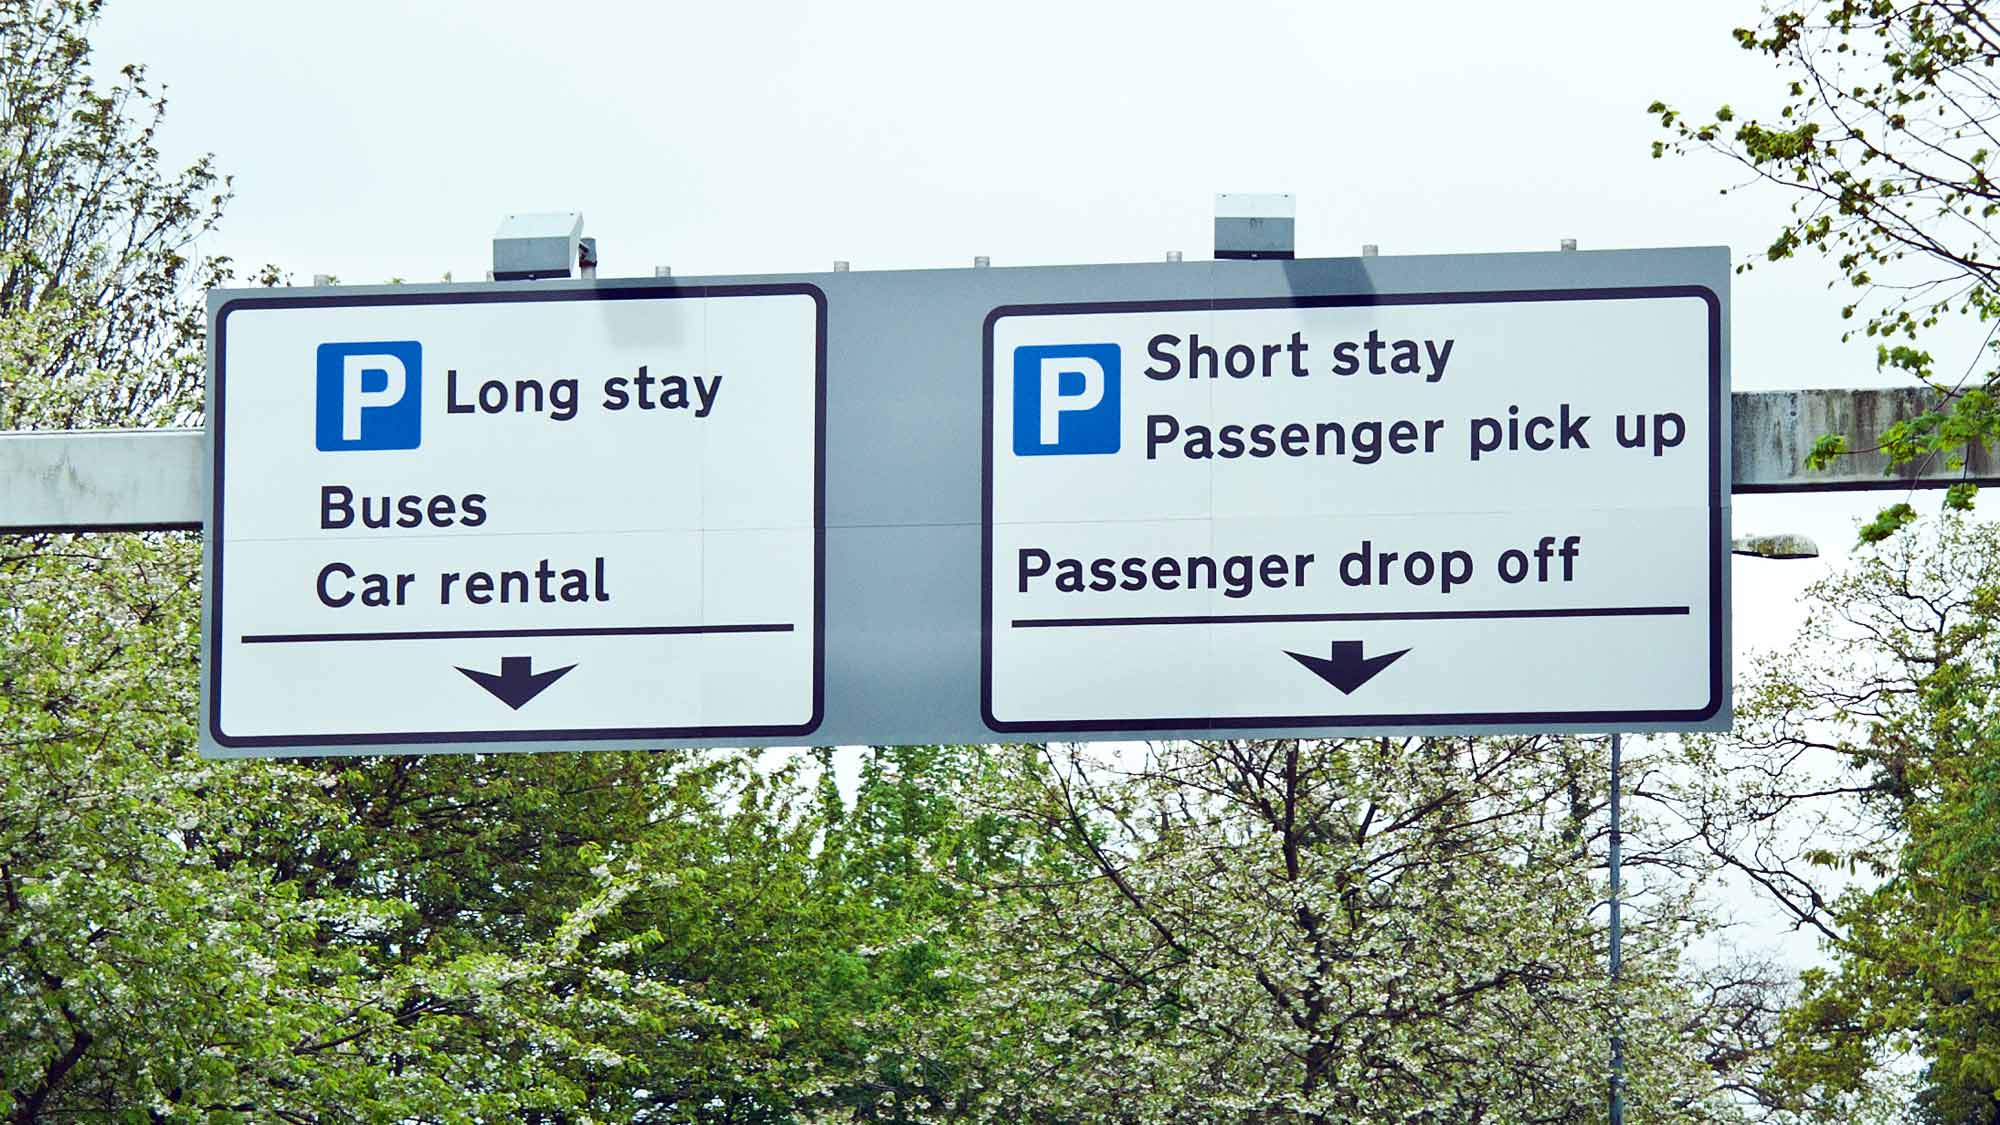 Signs to passenger drop off